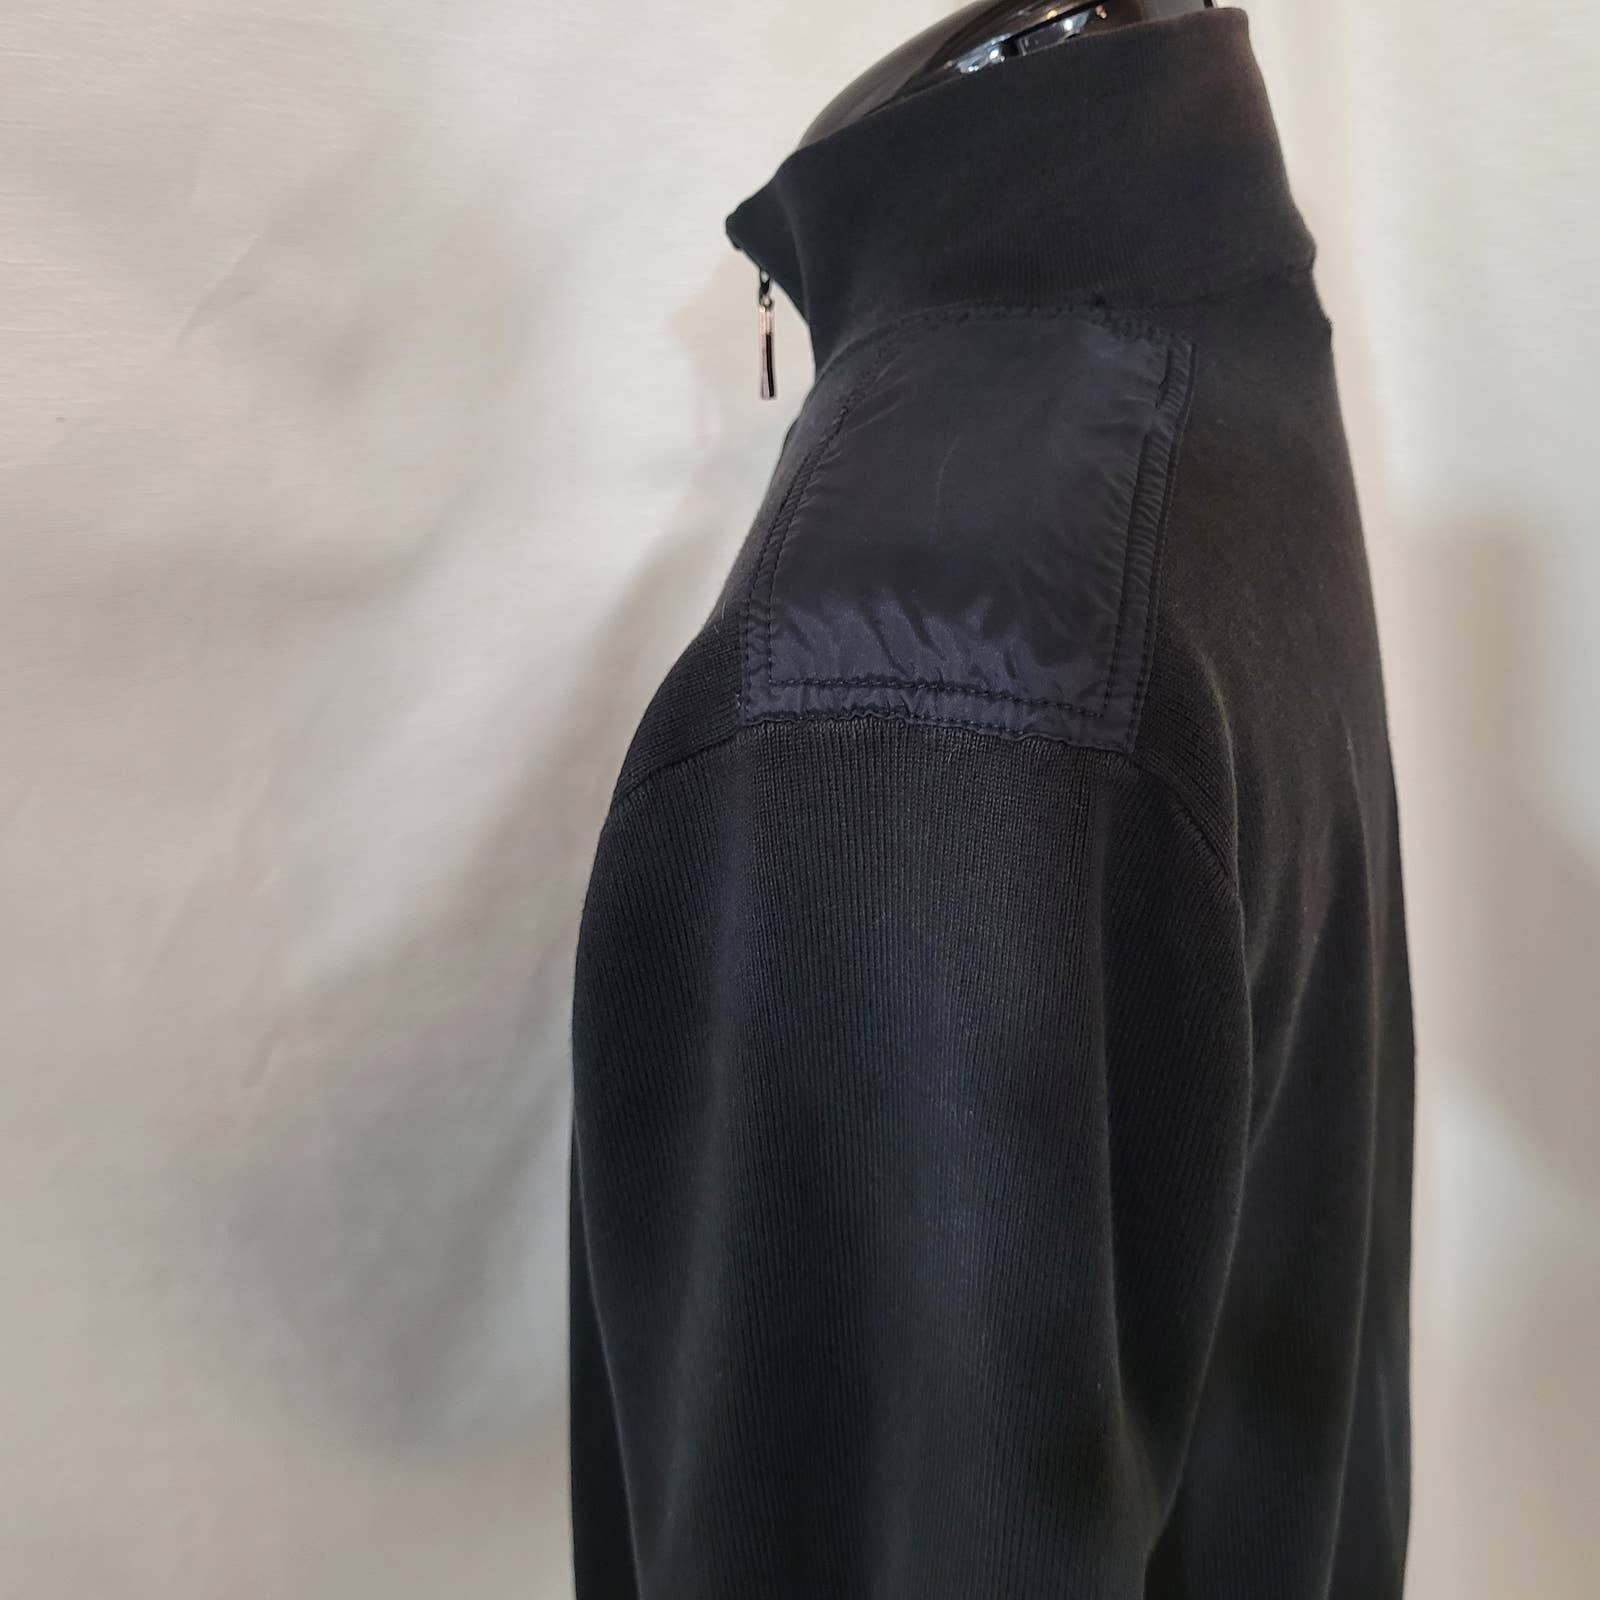 Mexx Black Zip Up Sweater with Shoulder and Elbow Patches - Size MediumMarkita's ClosetMexx